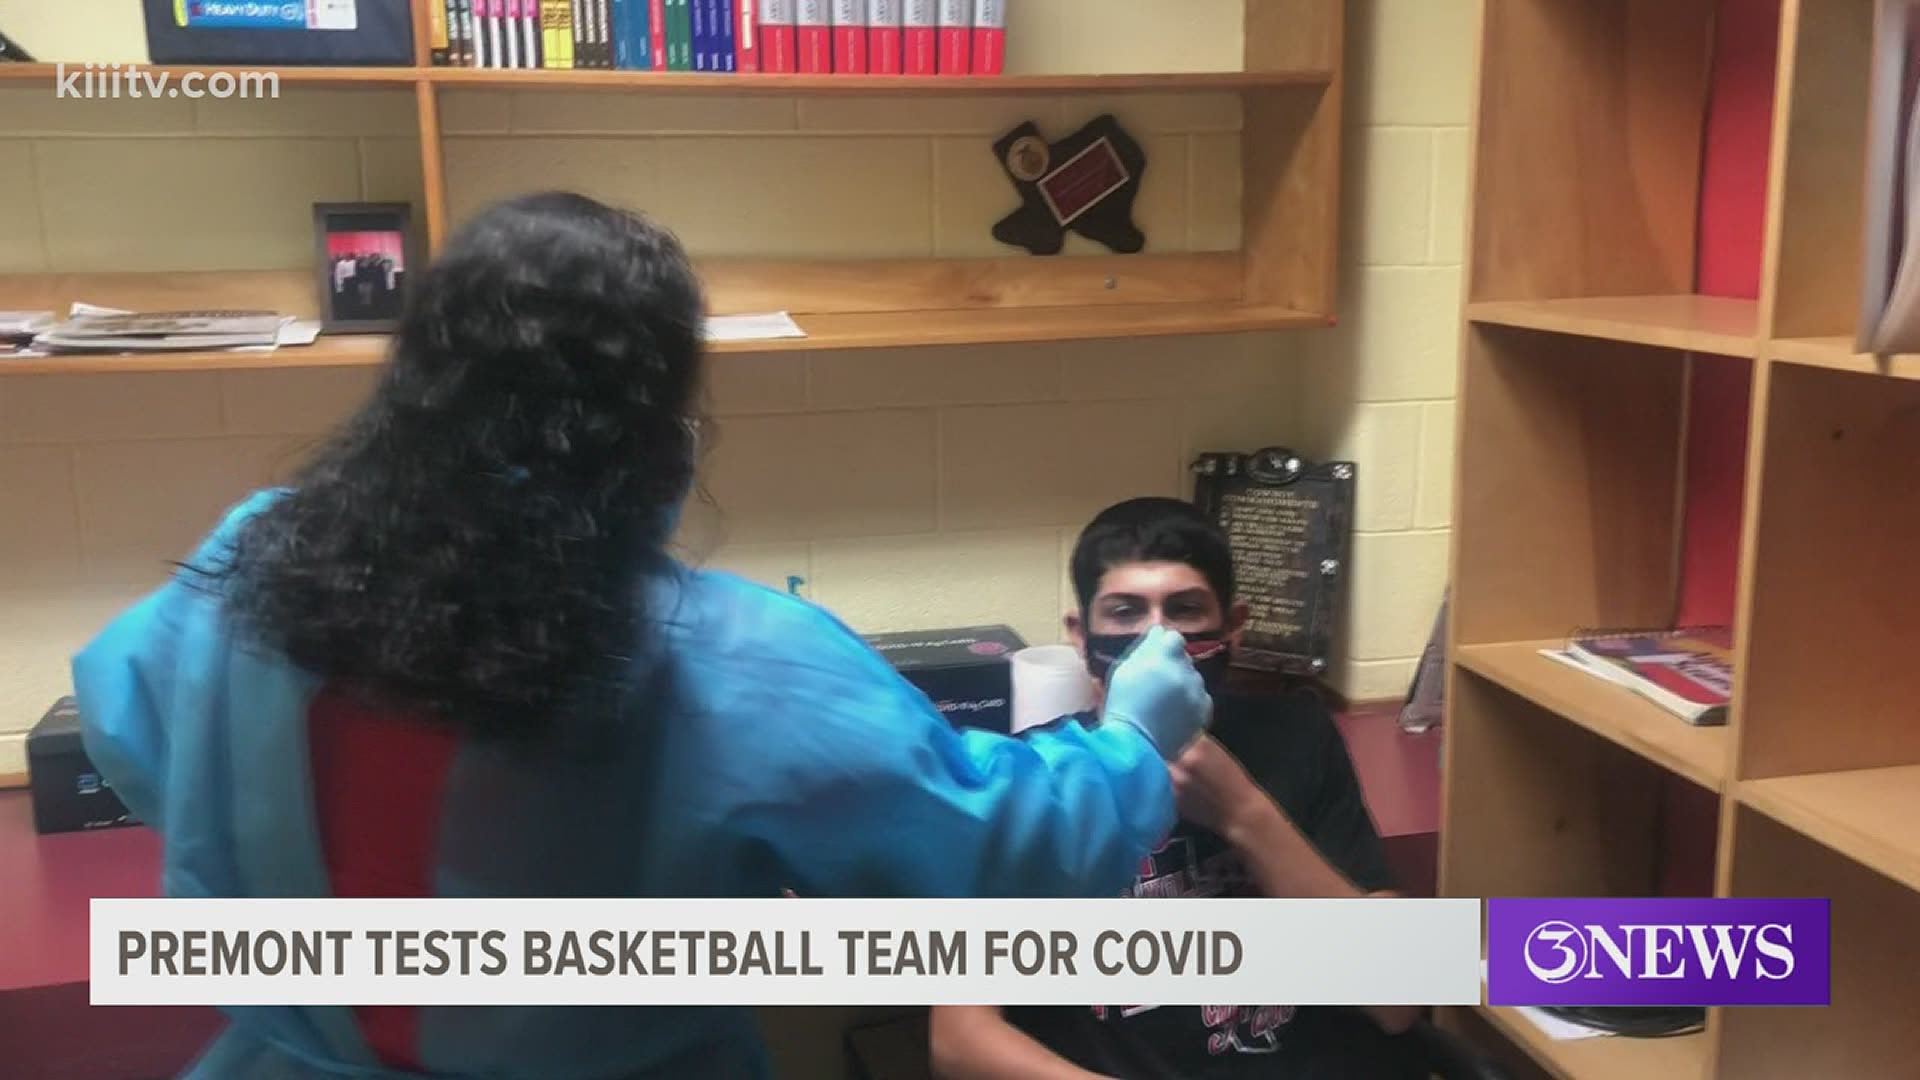 The district nurse conducted testing after the team's potential encounter with a COVID positive opponent.